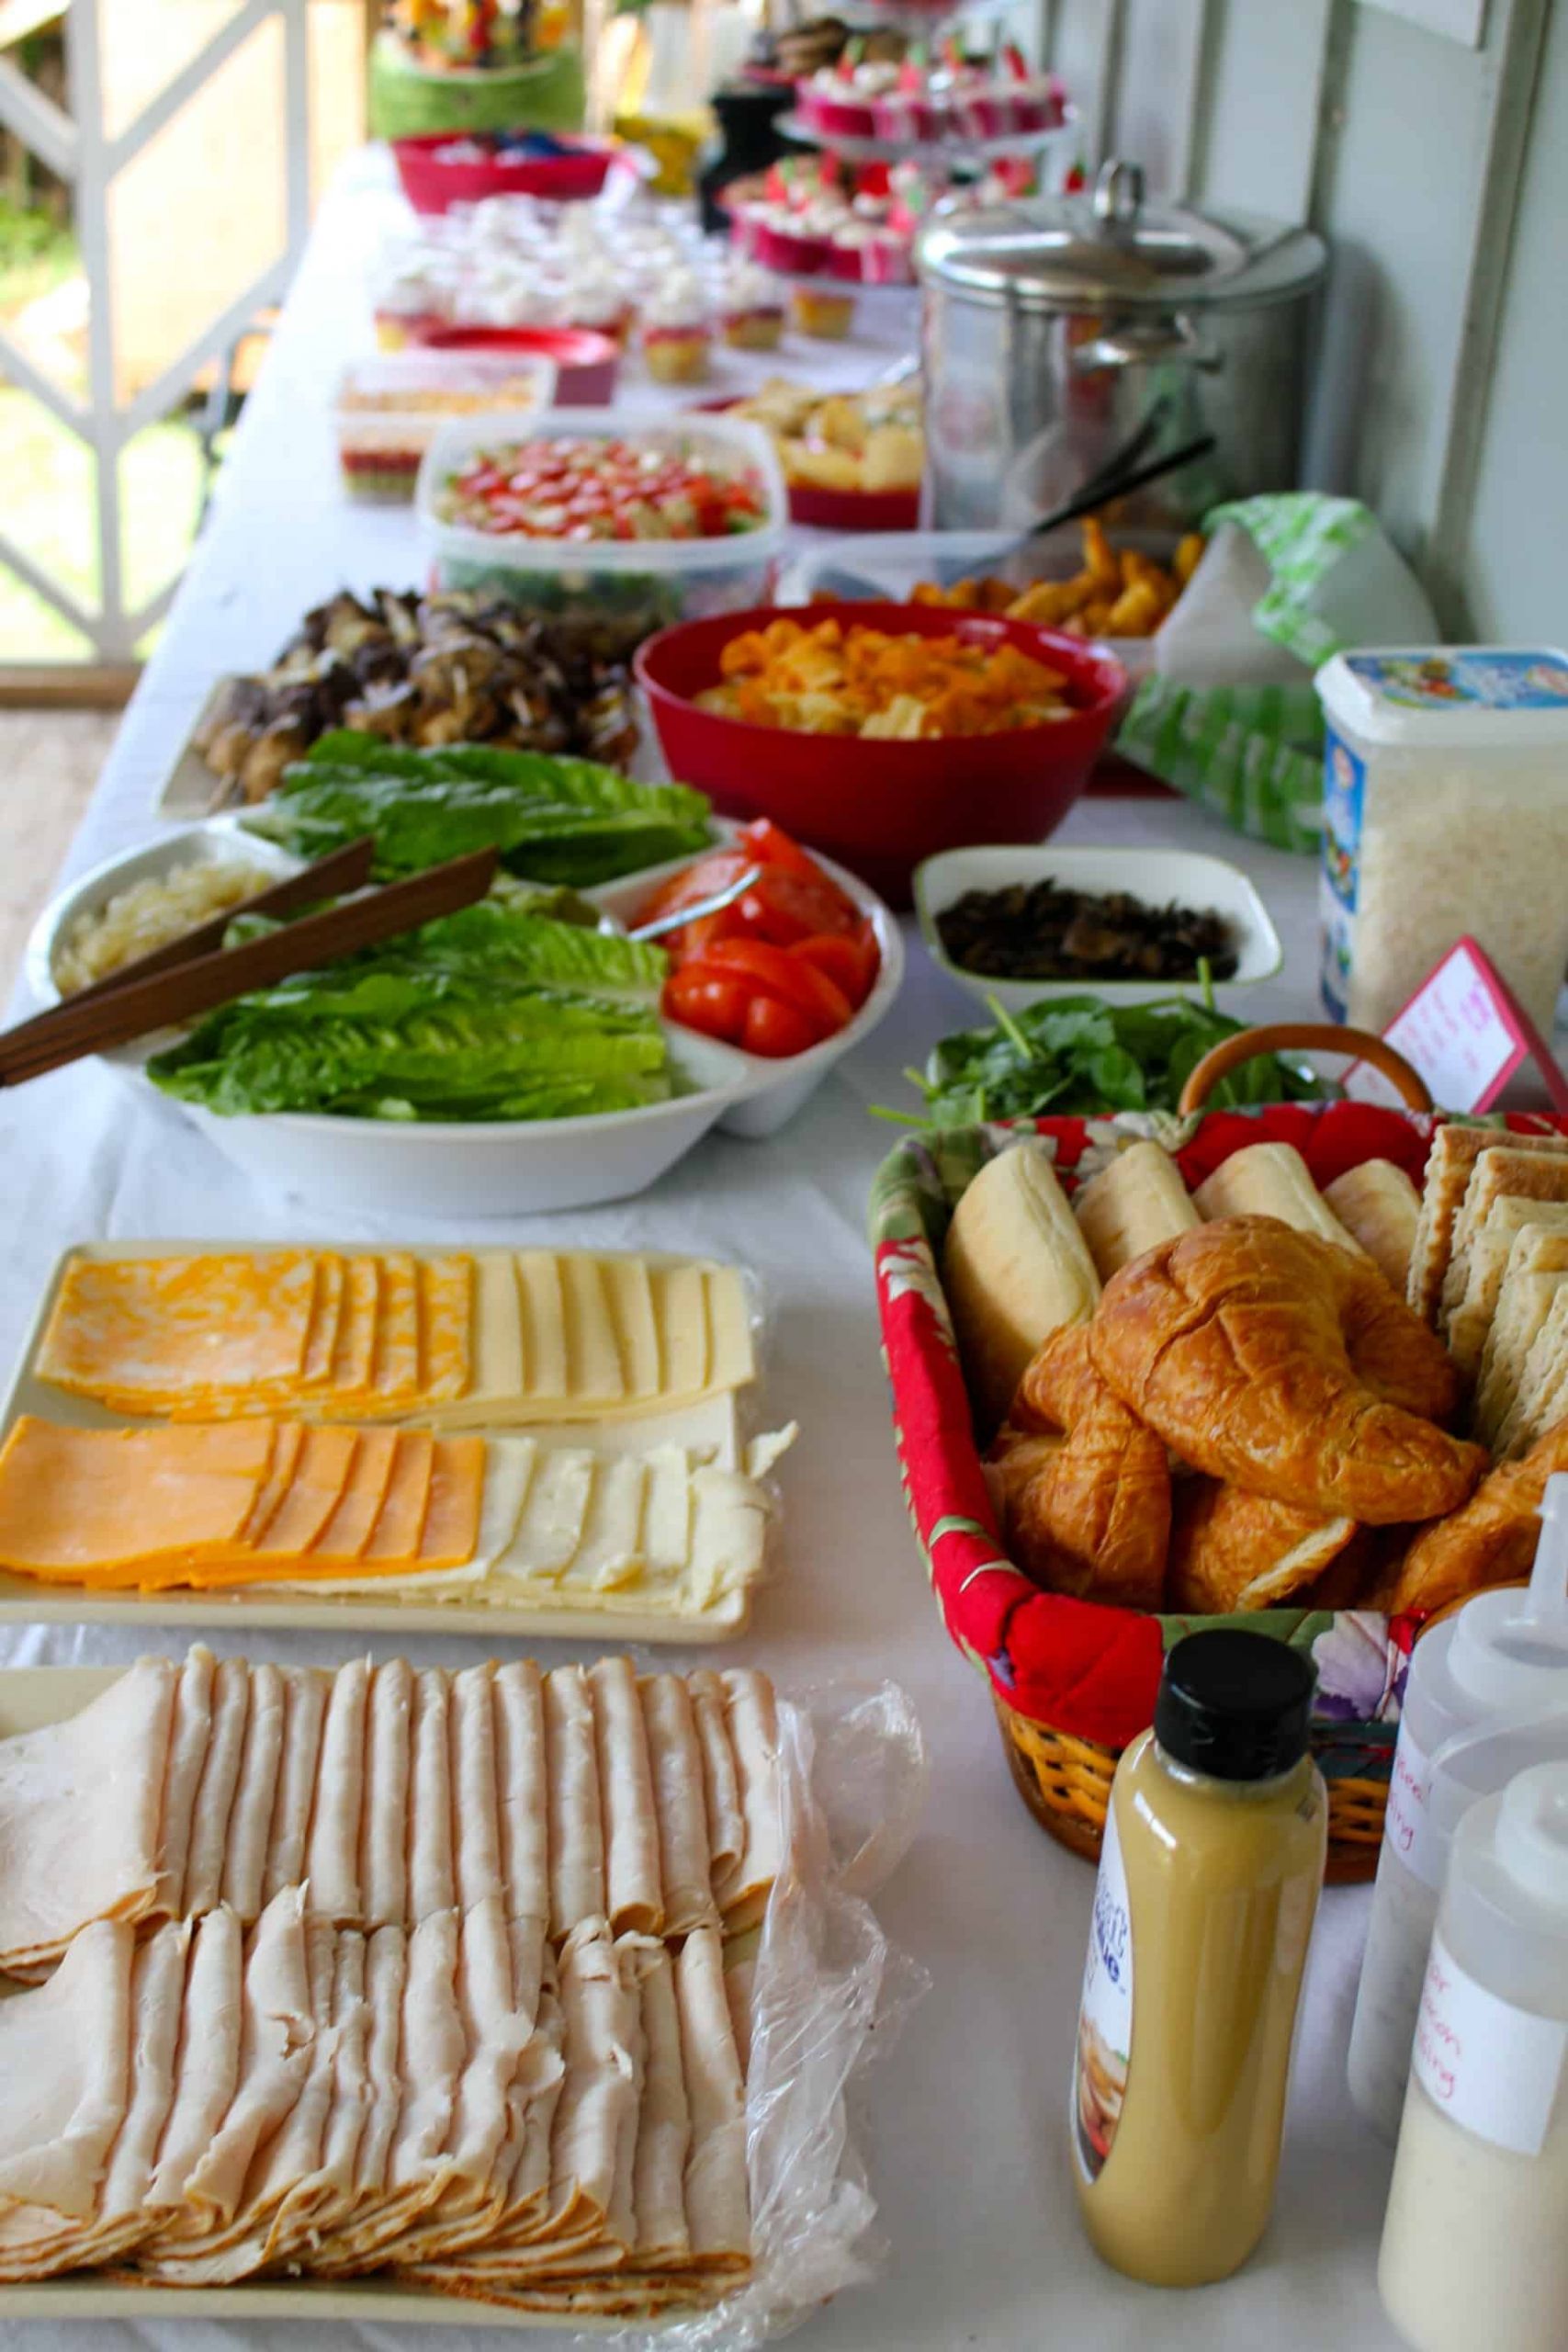 Graduation Party Food Ideas On A Budget
 Top 100 Easy Grad Party Food Ideas Zachary kristen